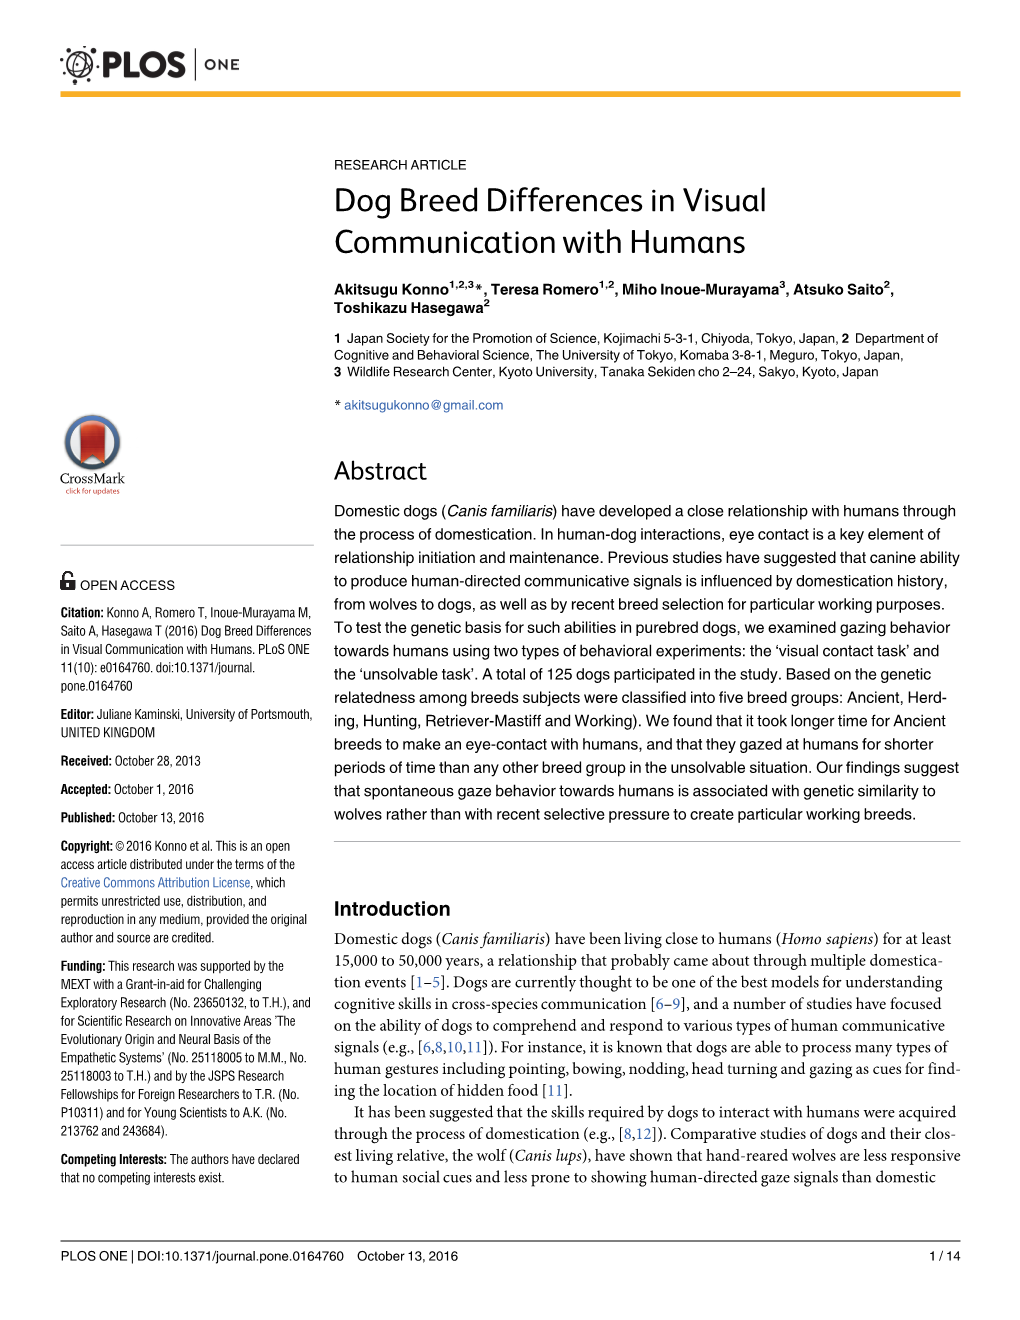 Dog Breed Differences in Visual Communication with Humans